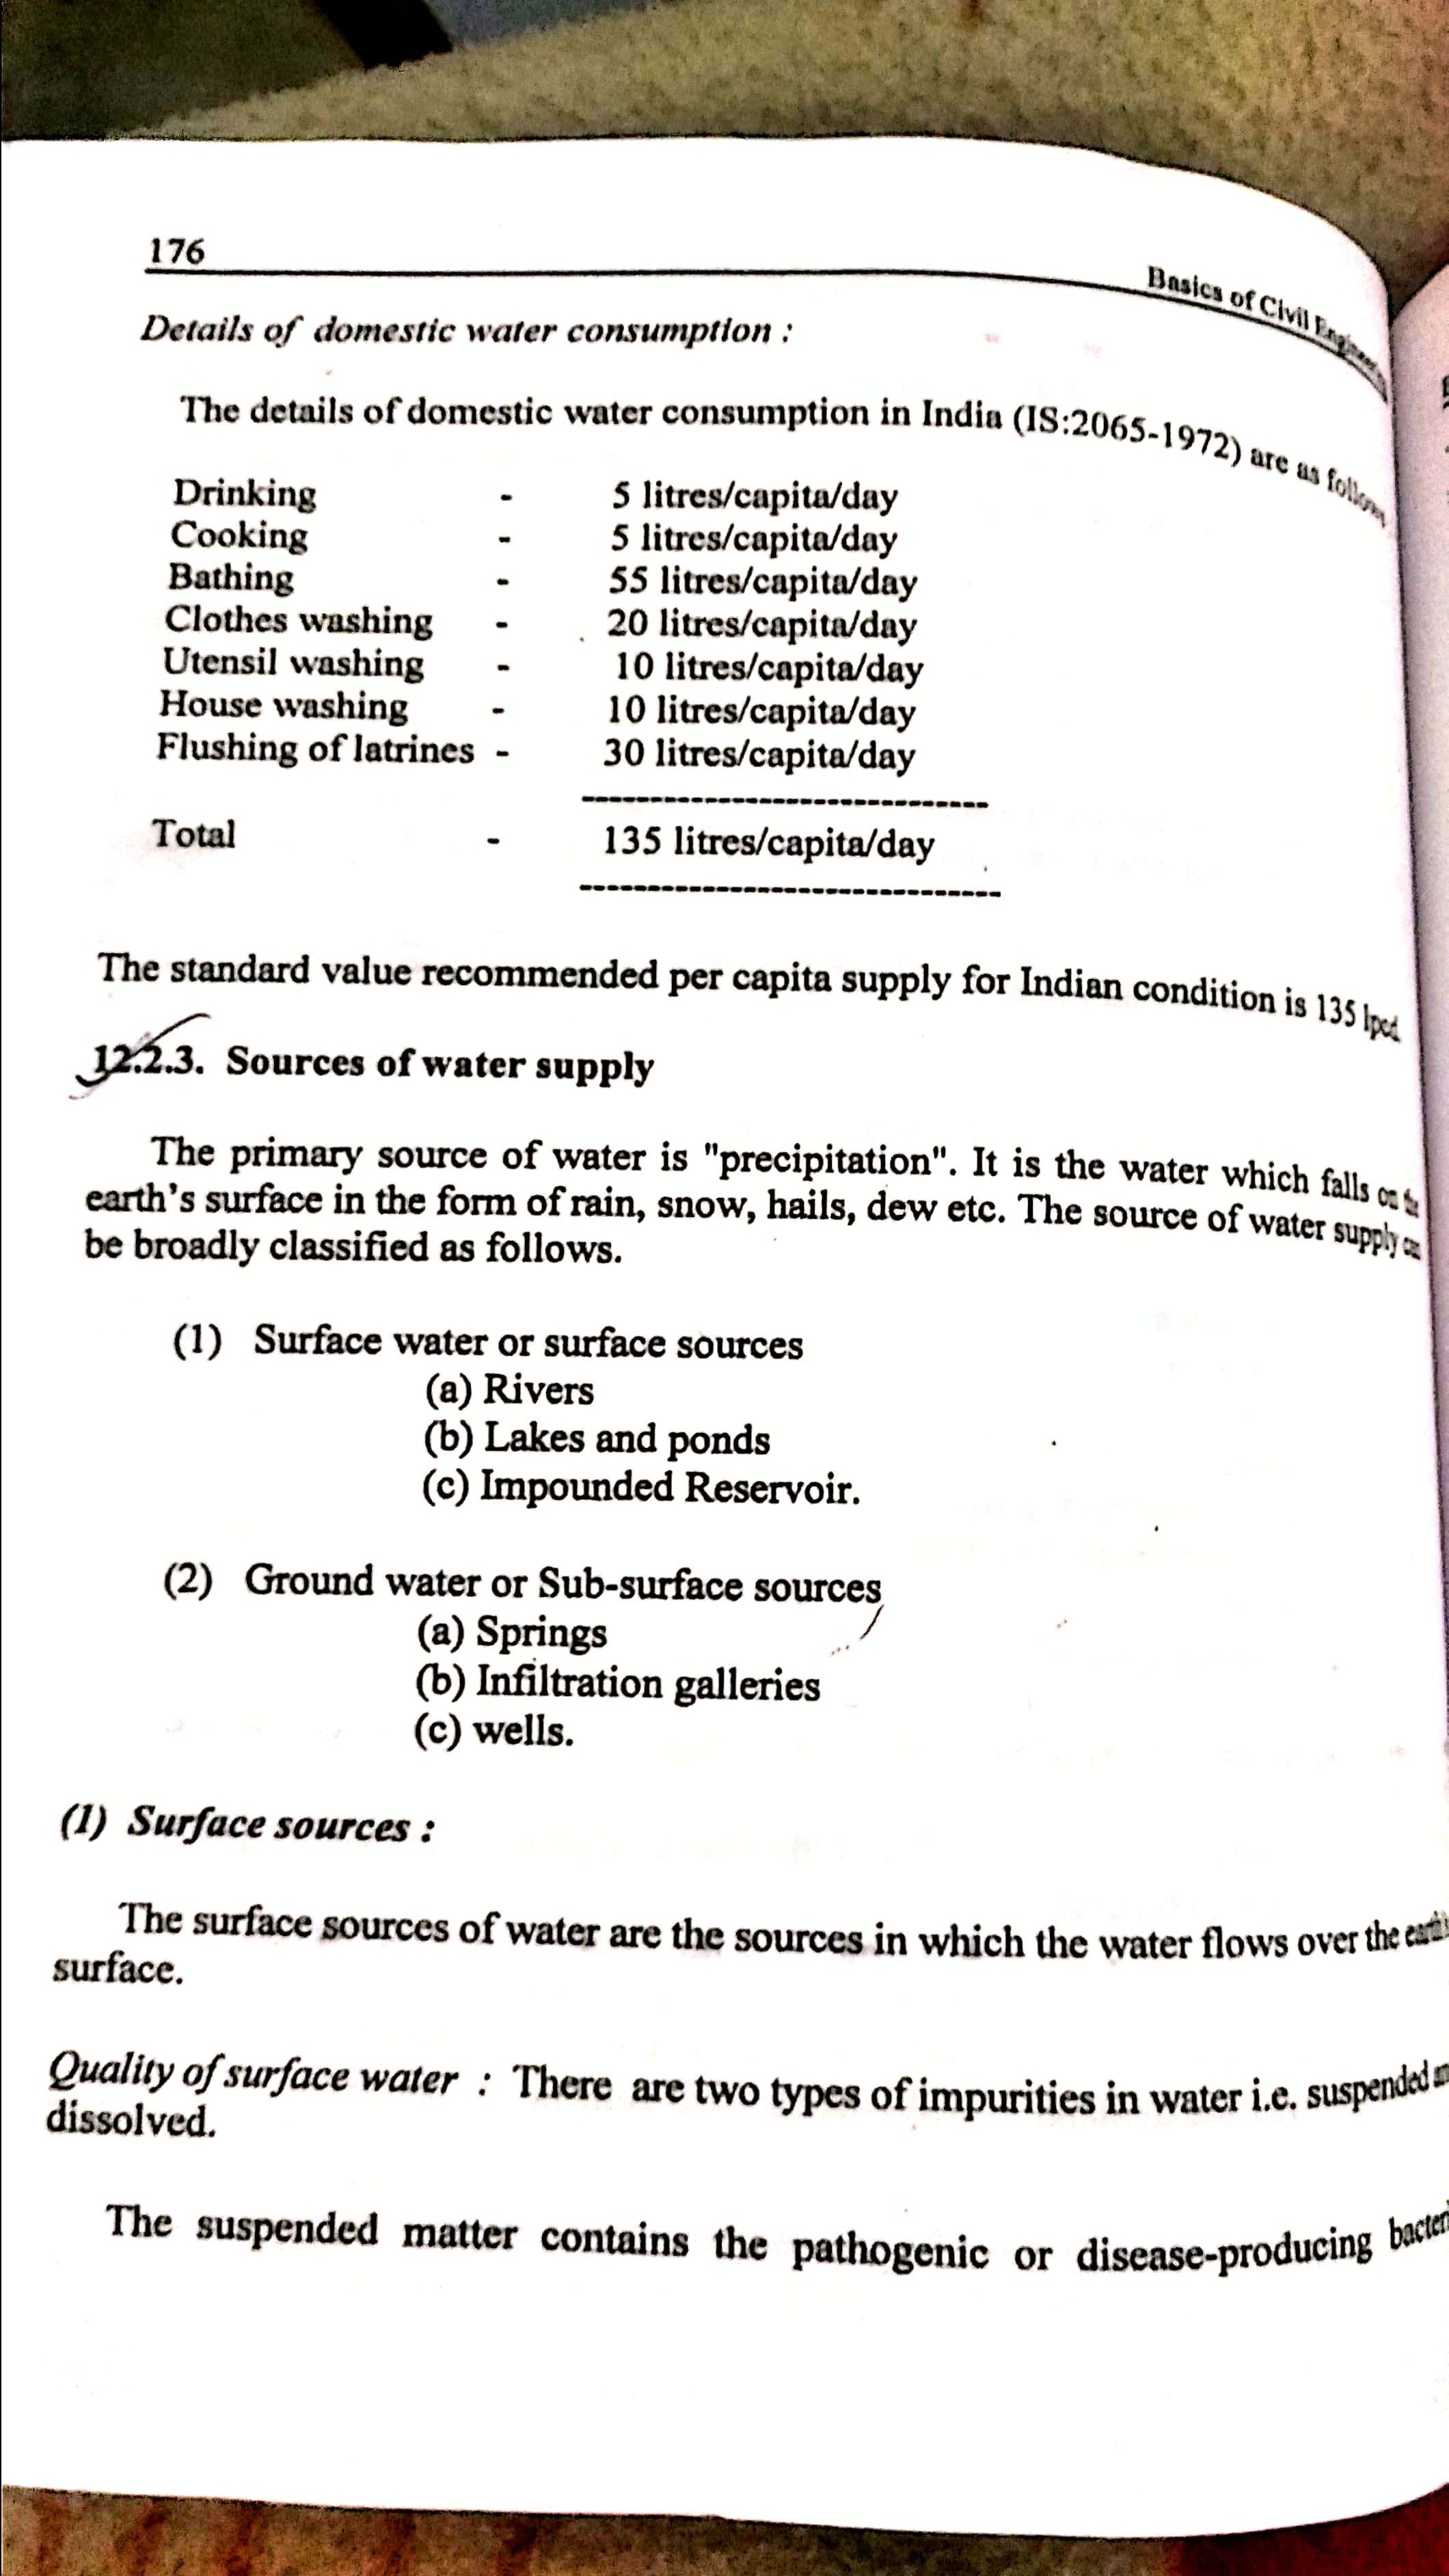 sources of water supply -New Doc 2019-11-30 20.41.41_77.jpg